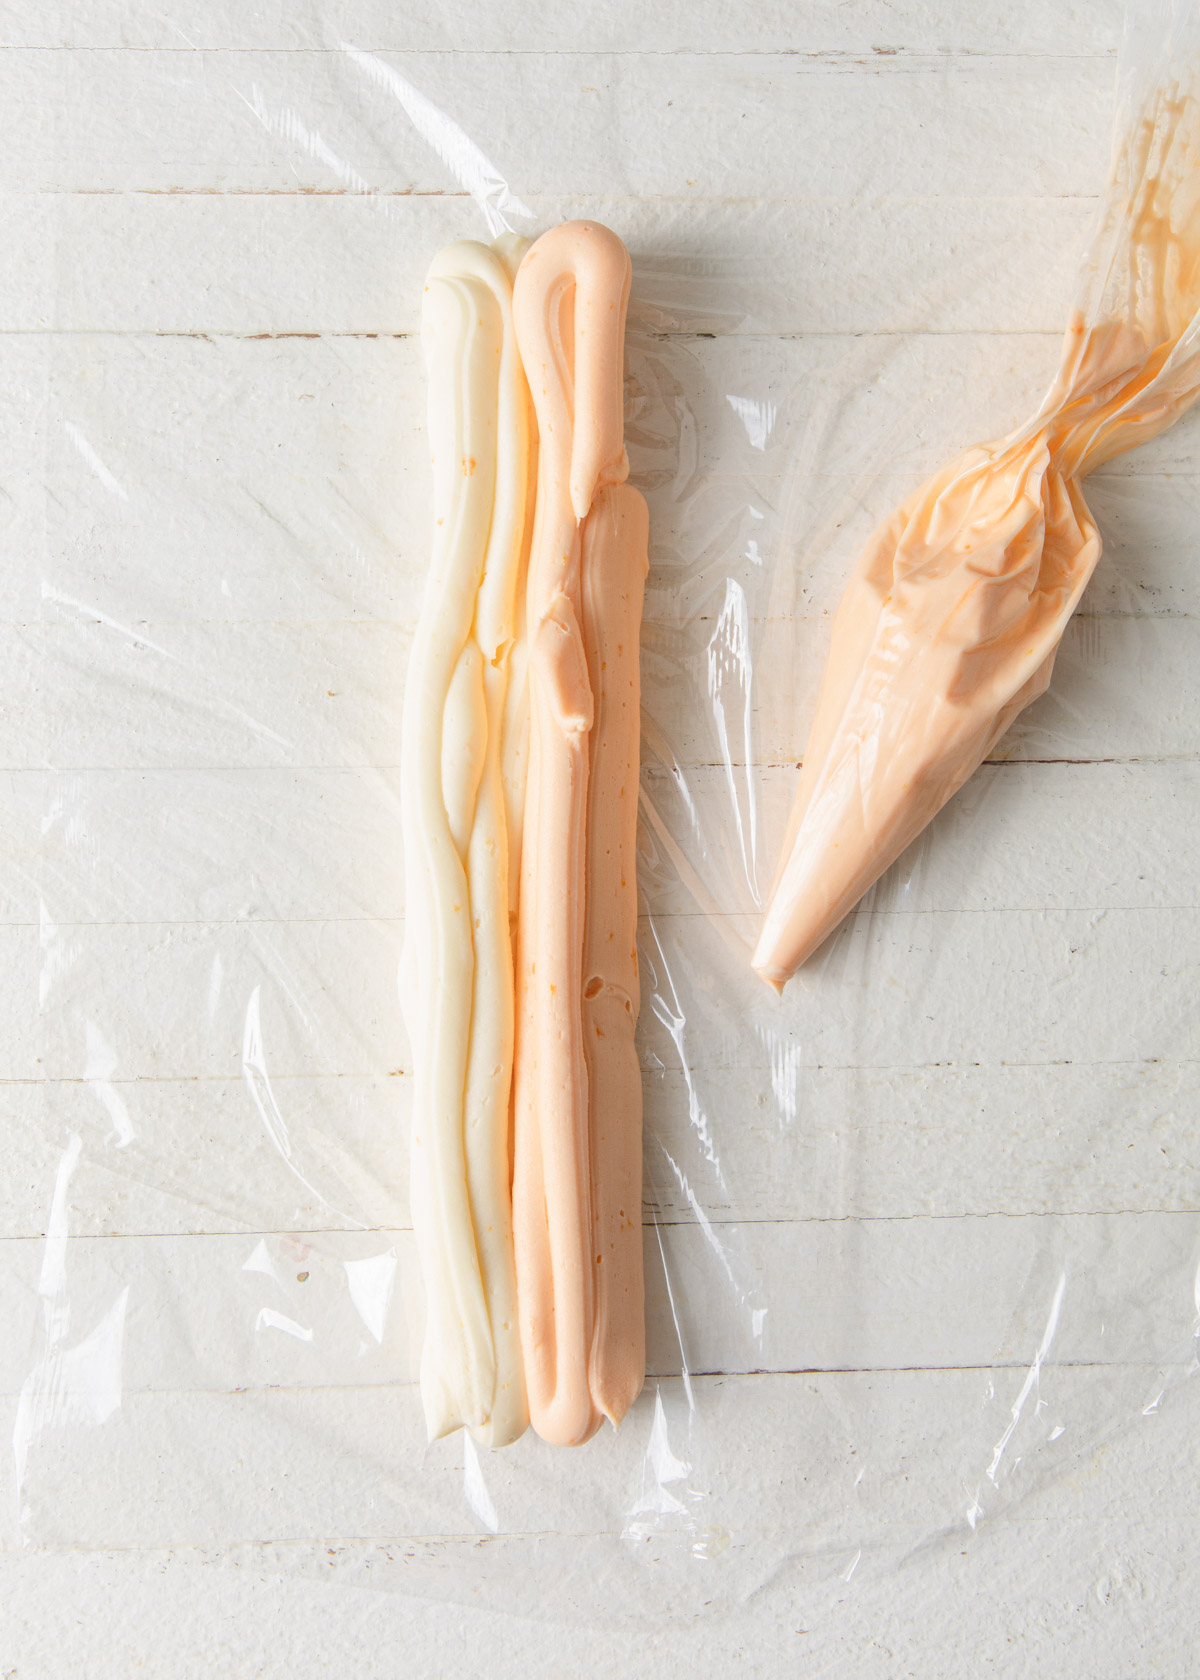 White and orange buttercream in rows on a piece of plastic wrap